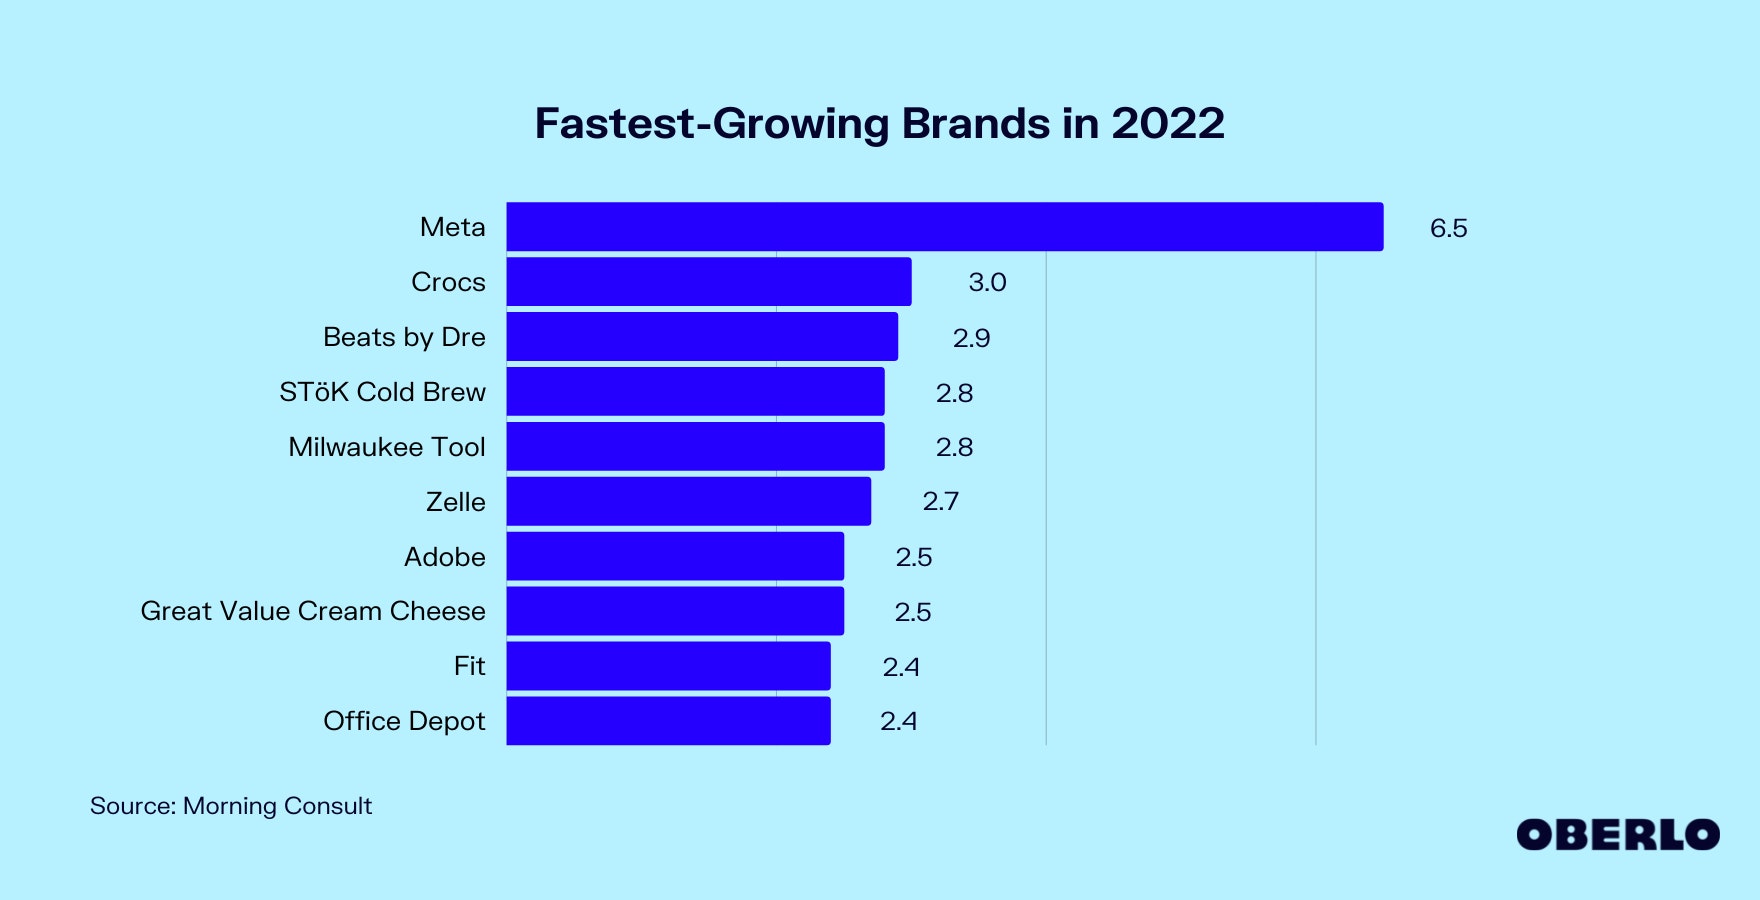 Chart of the Fastest-Growing Brands in 2022